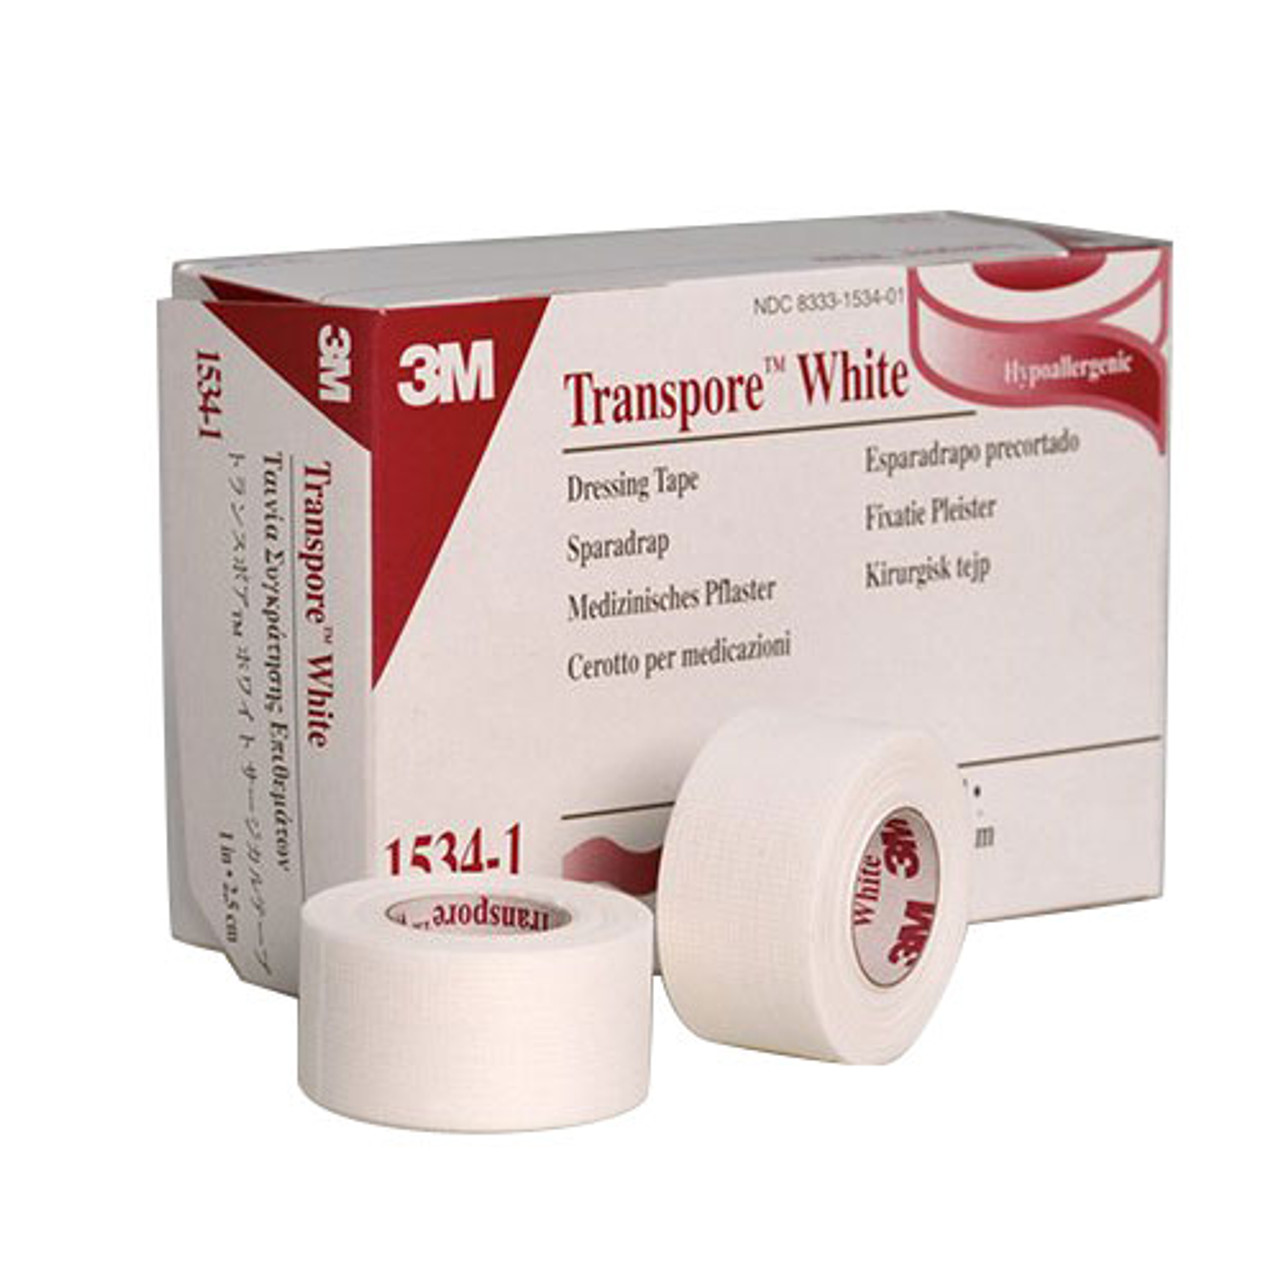 acuut In de omgeving van straffen 3M Transpore White Surgical Tape 1/2" Box of 12 Rolls 1534-0 for Wireless  Microp - Monkey Wrench Productions Store